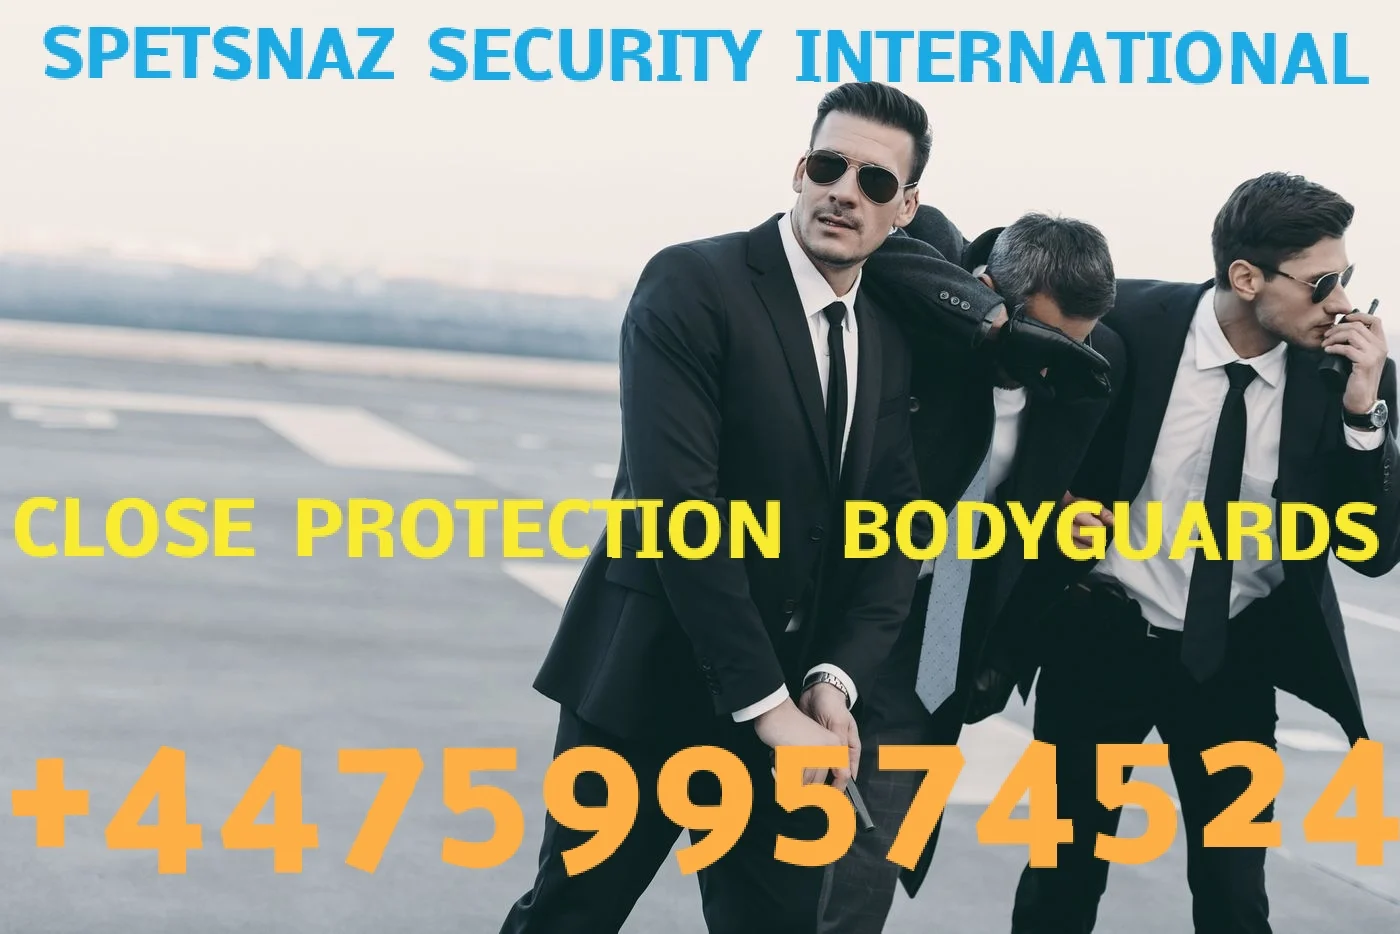 Armed Close Protection Services-Executive bodyguard-Executive Close Protection. With its close protection teams, TSpetsnaz Security International Fidel Matola can work with its clients to protect their business's most valuable assets – their personnel, families, and their properties at all points in potential risk situations.-